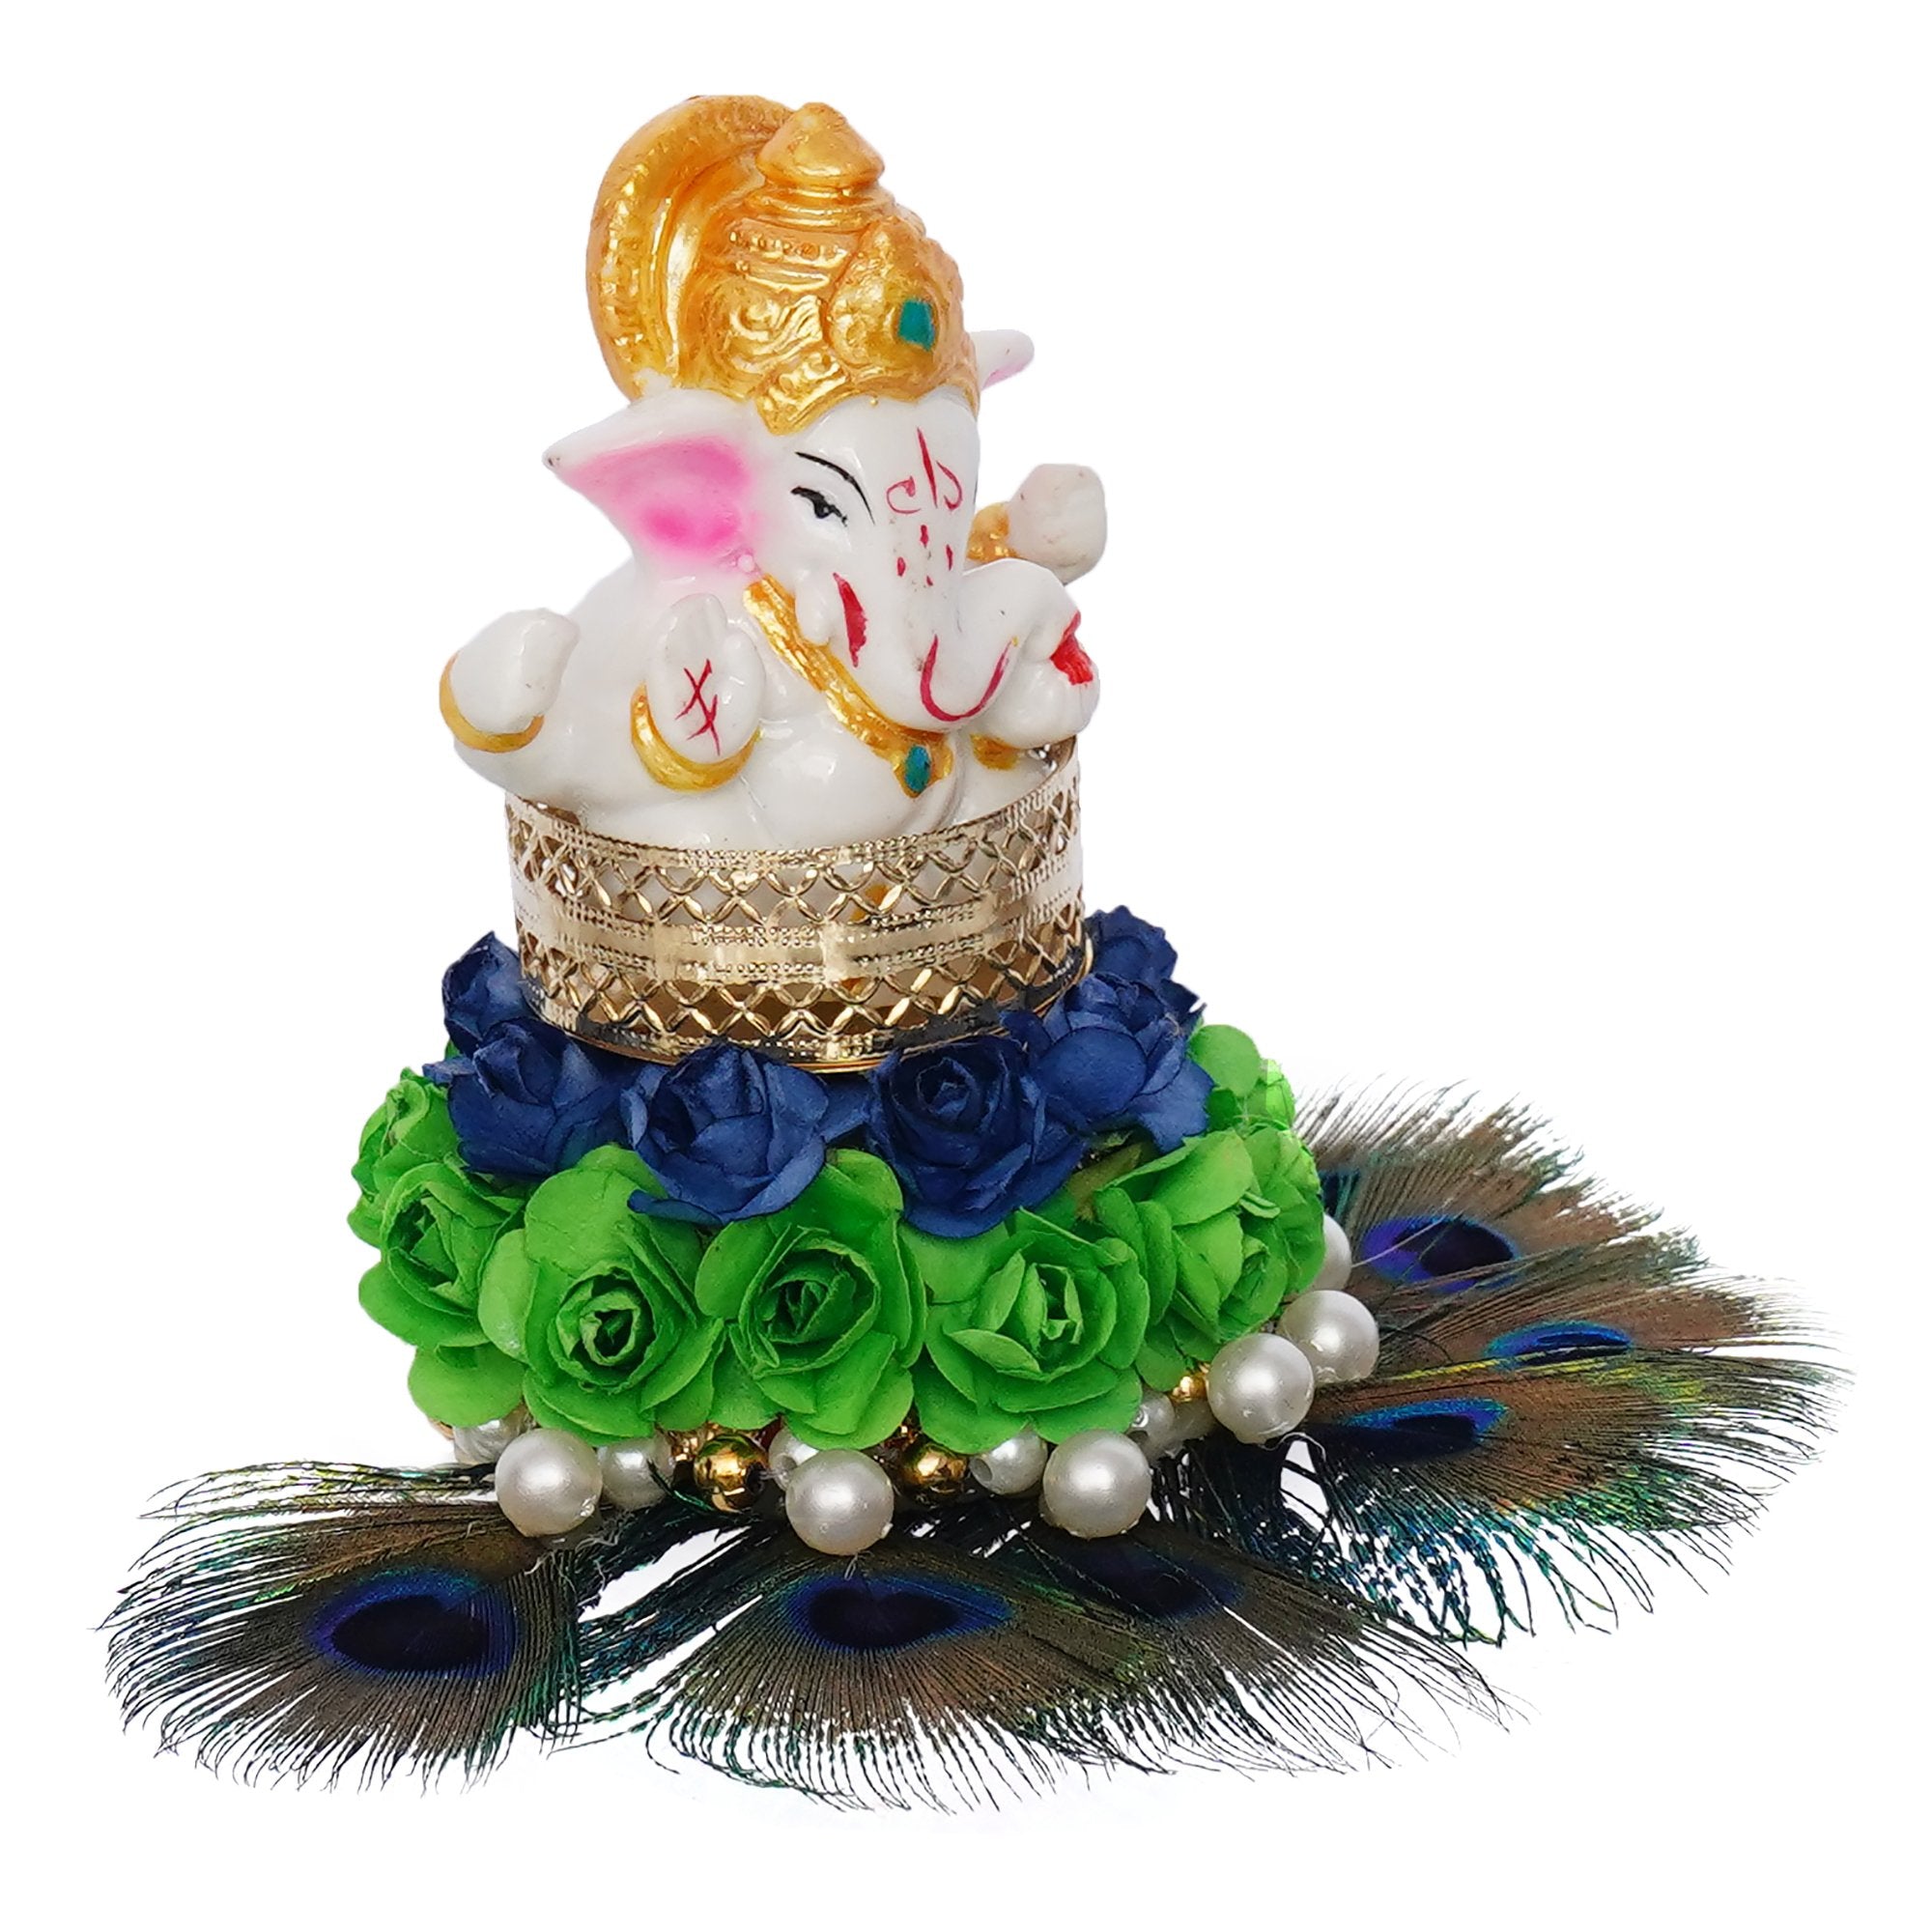 Lord Ganesha Idol on Decorative Handcrafted Floral Plate with Peacock Feather for Home and Car